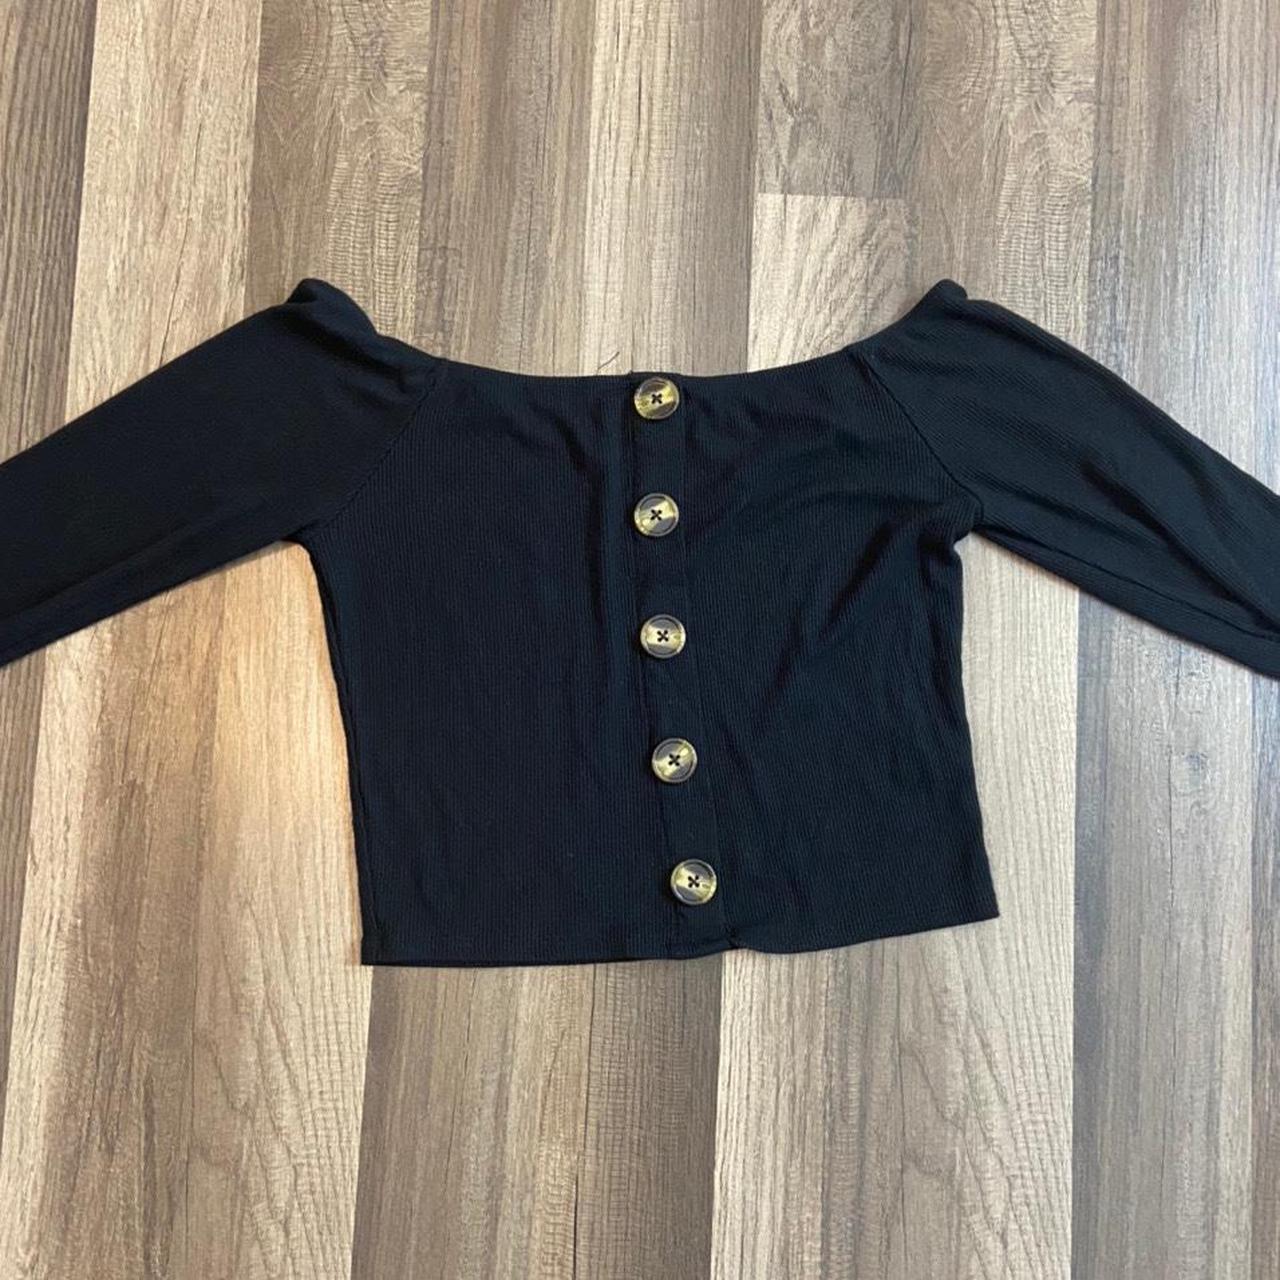 Product Image 2 - black croptop with buttons ꨄ!

MESSAGE